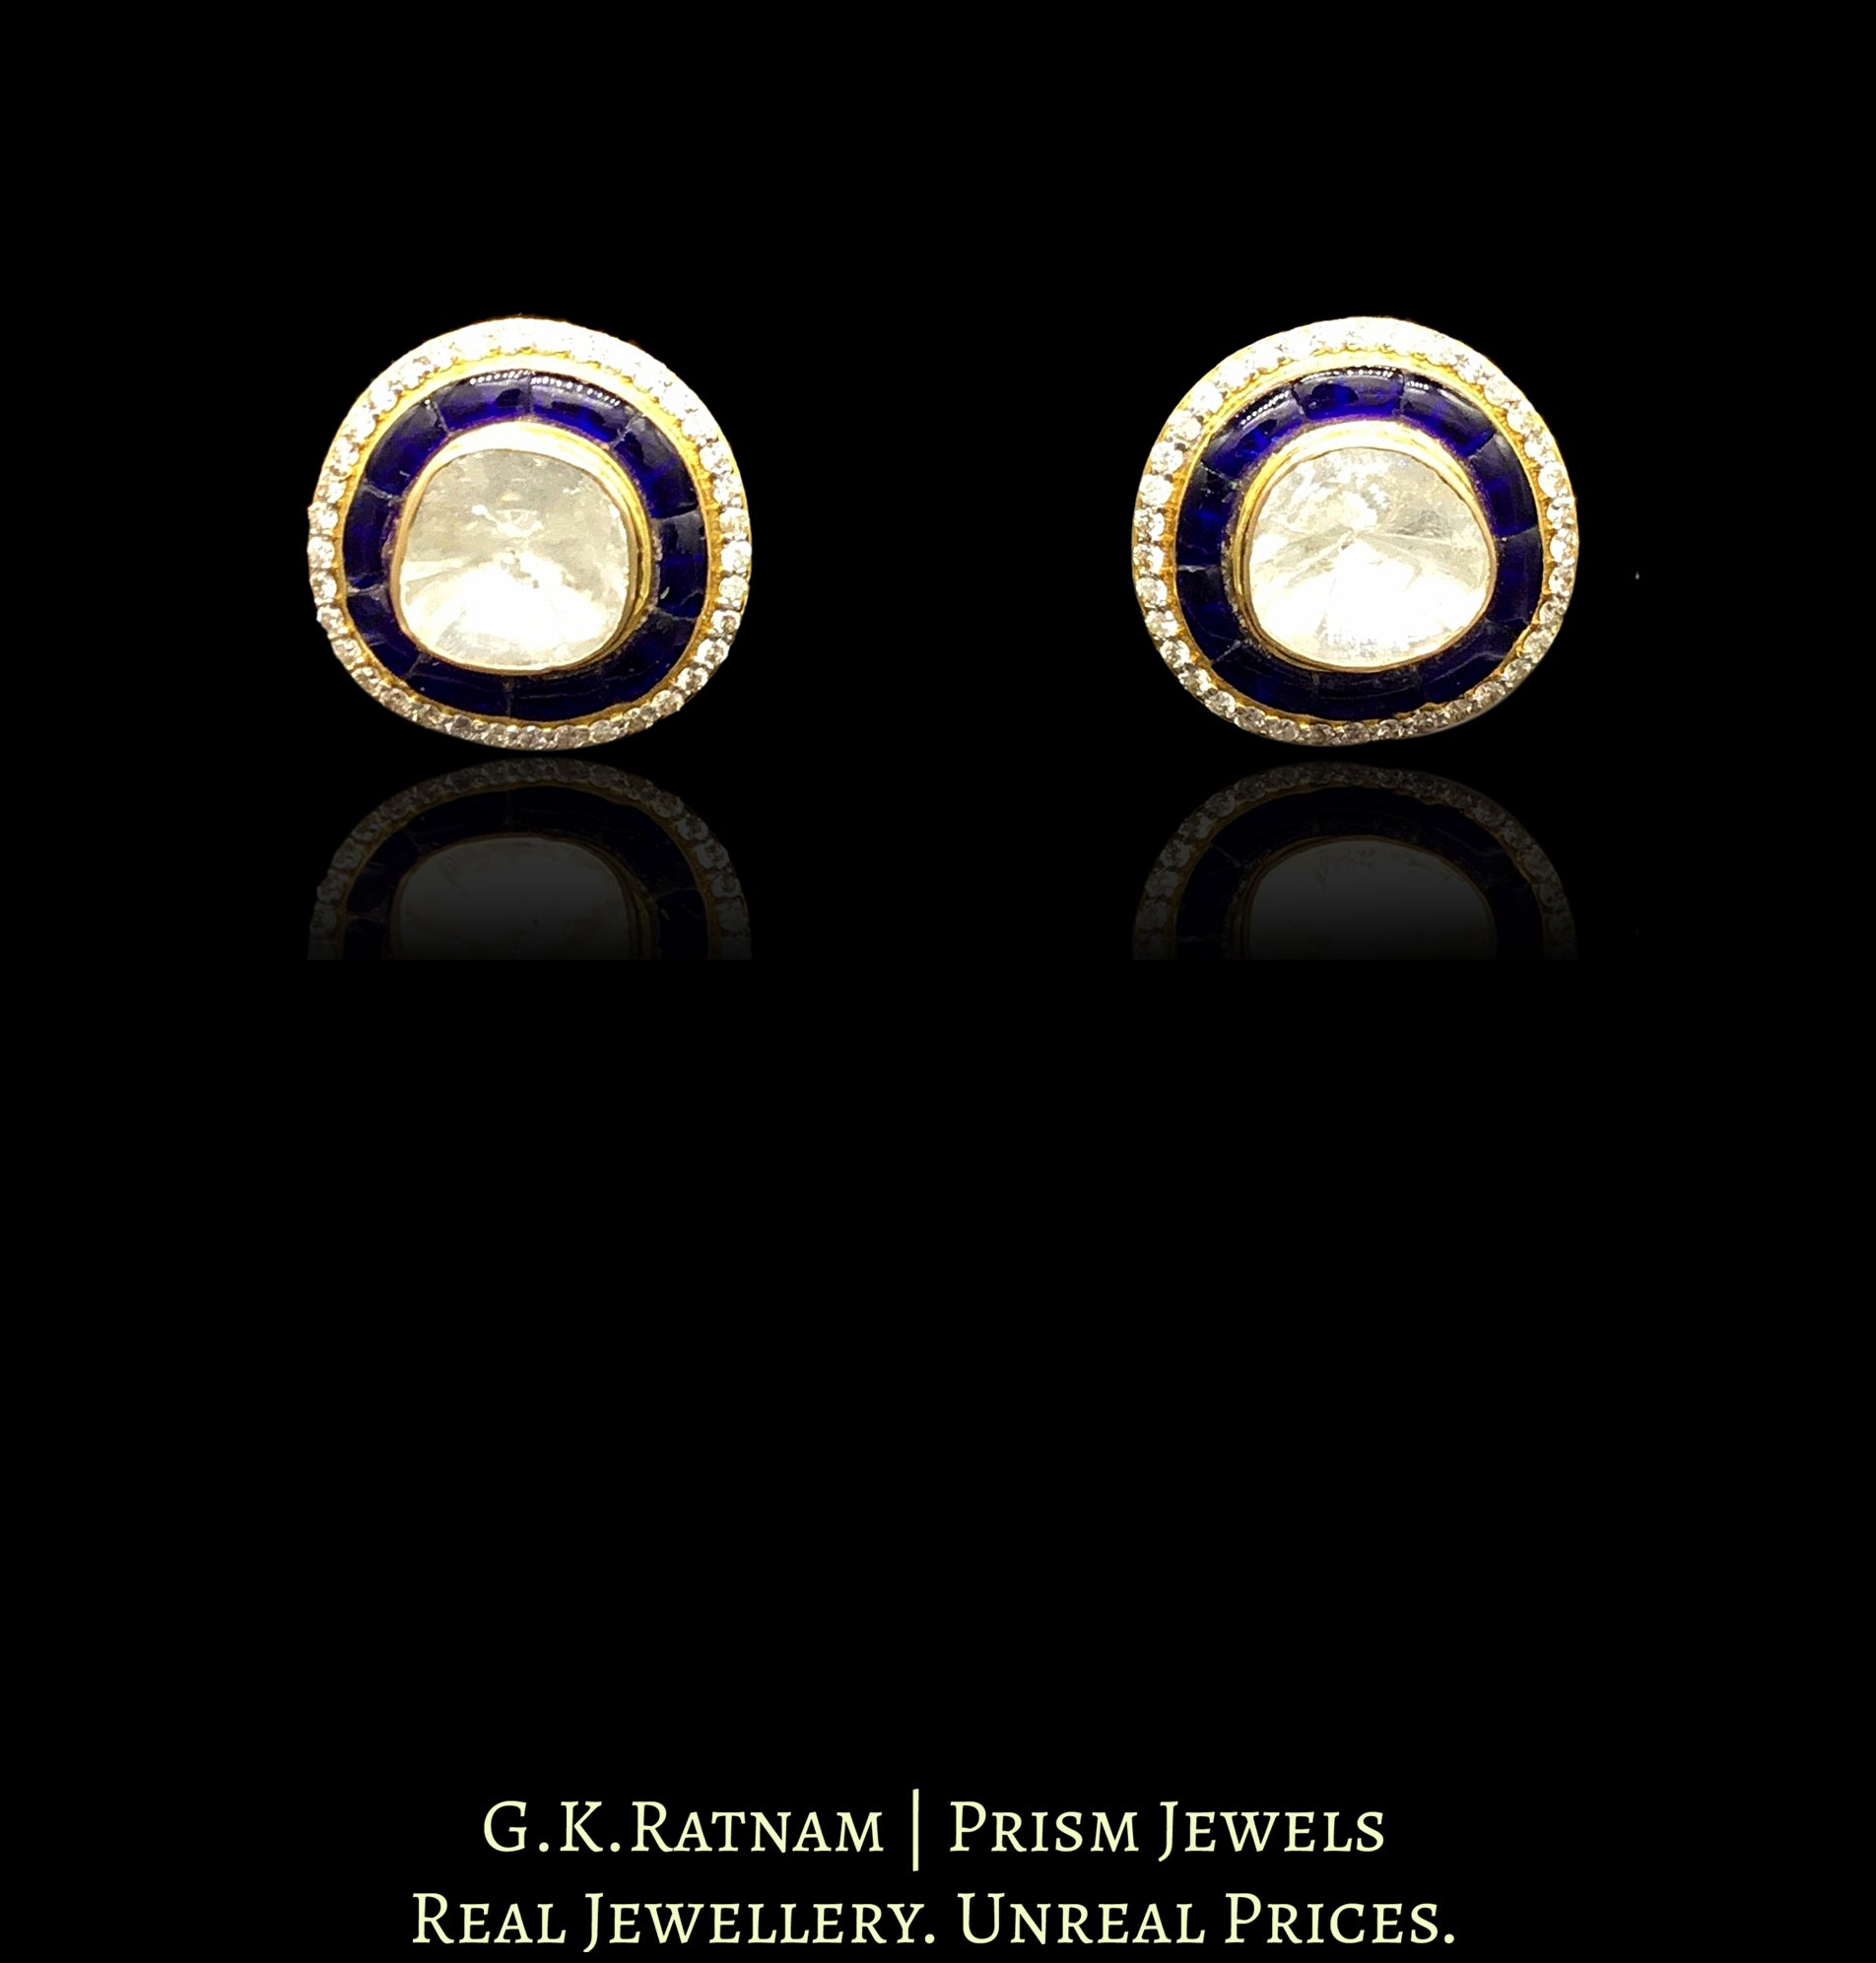 14k Gold and Diamond Polki Open Setting Tops / Studs Earring Pair with Big Uncuts encased by blue stones and diamonds